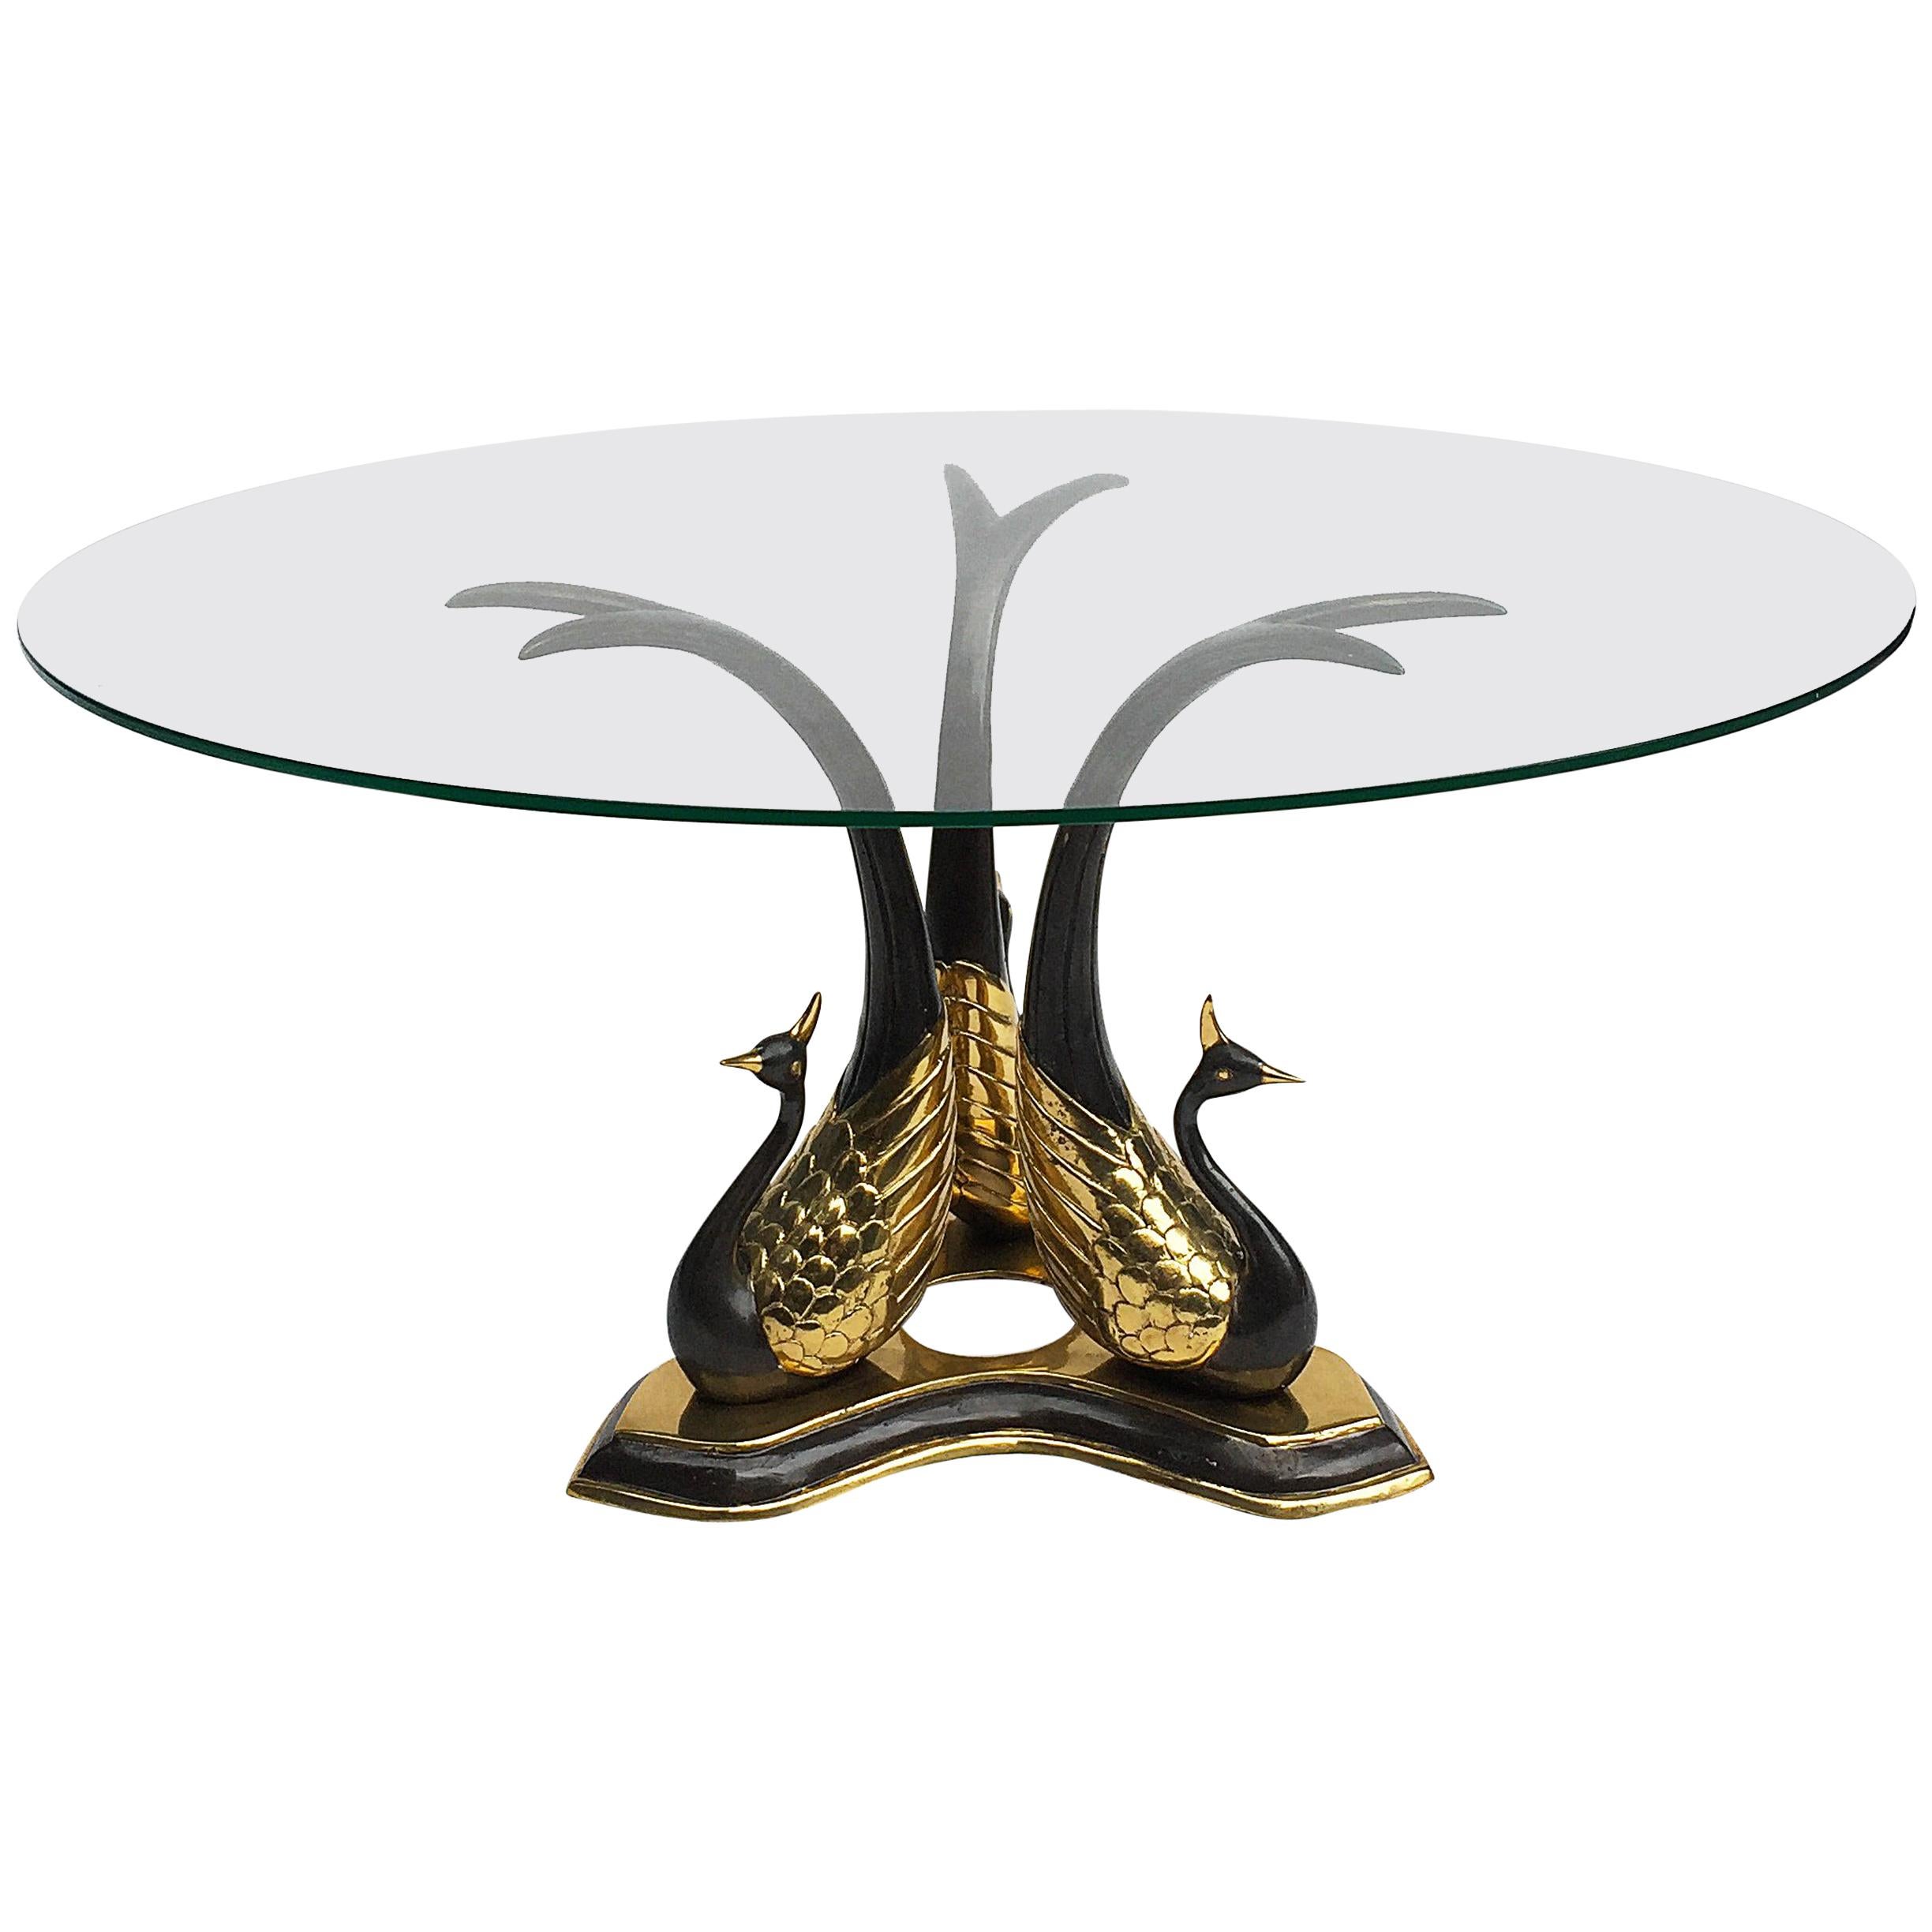 Hollywood Regency Brass and Glass Circular Peacock Side or Coffee Table, 1970s For Sale